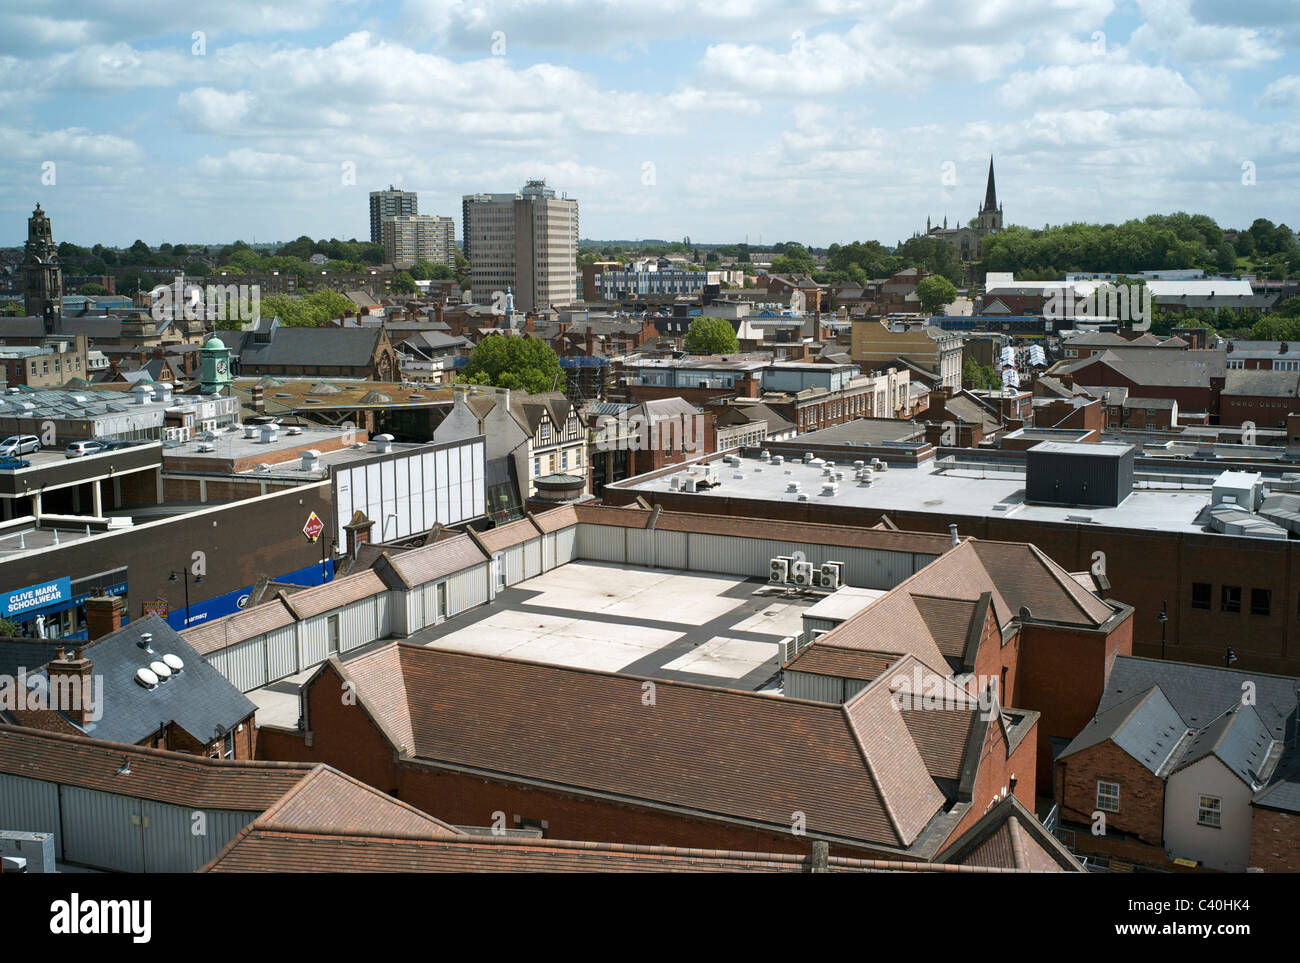 Walsall town centre. Stock Photo